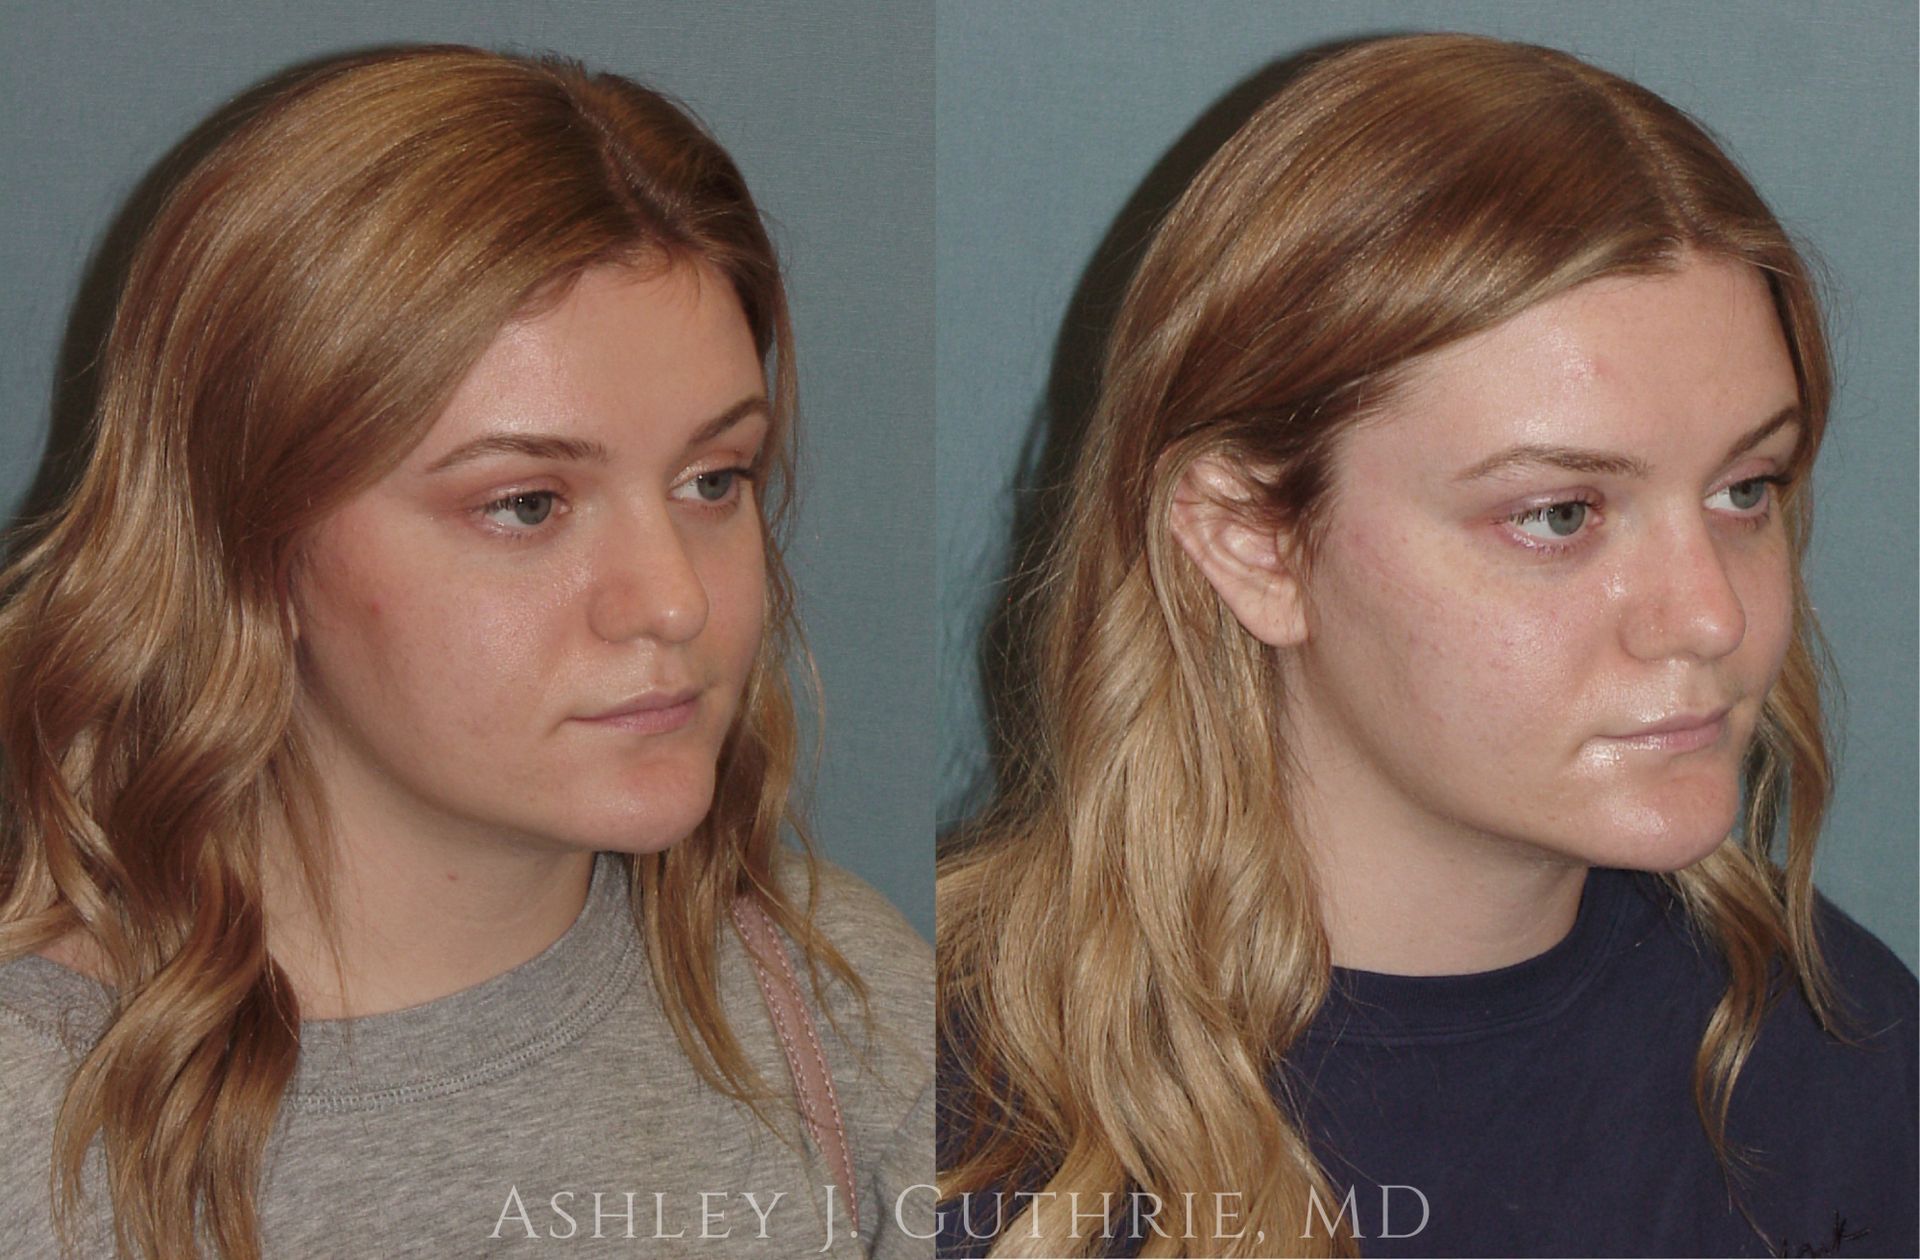 Guthrie Facial Plastic Surgery patient before and after Rhinoplasty procedure